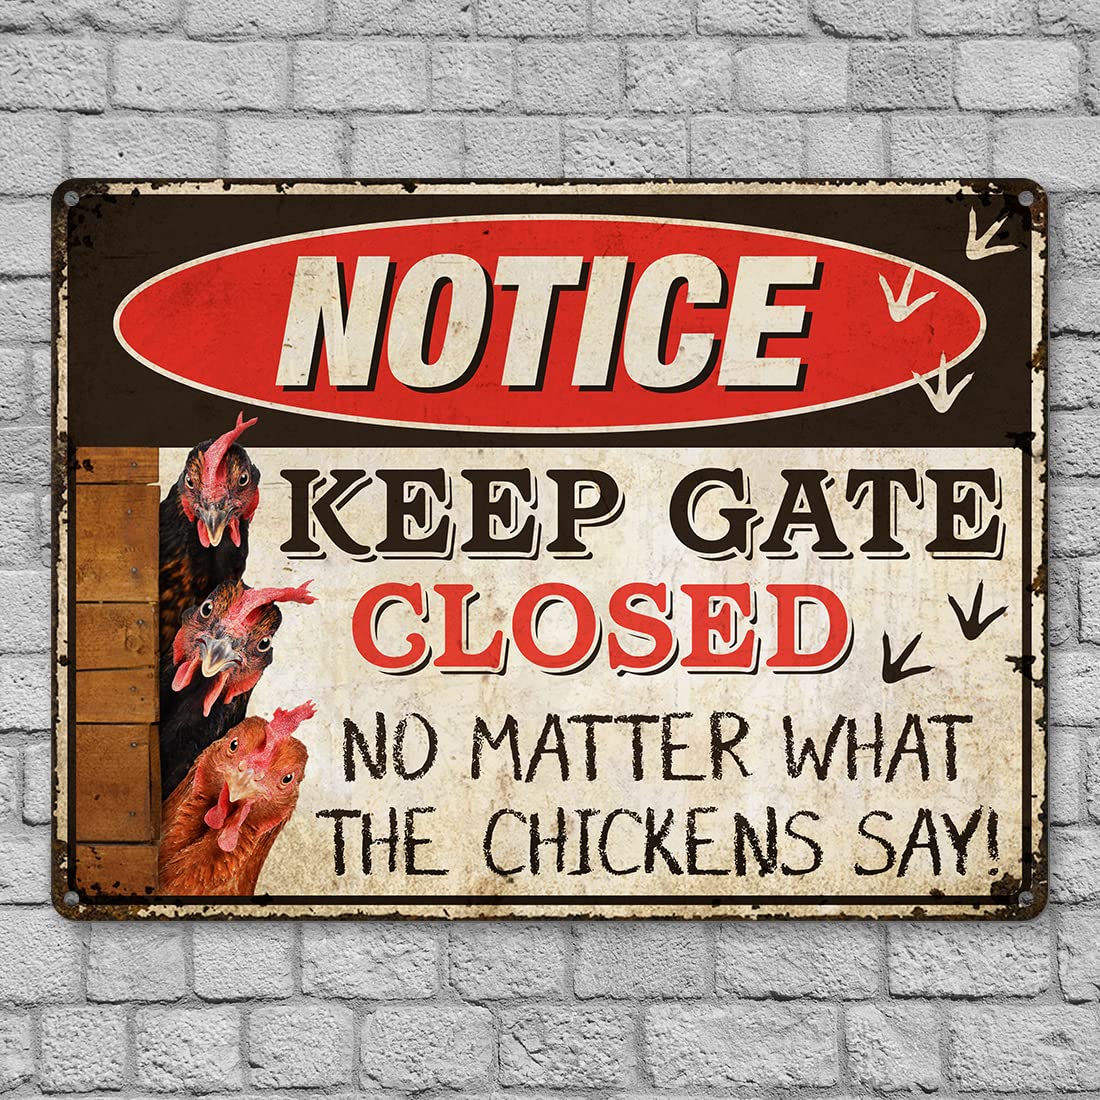 Warning Chicken Signs For Coop Funny Outdoor - Keep Gate Closed No Matter What The Chickens Say Aluminum Rust Free 9" X 11", Pre-Drilled Holes, Weather Resistant